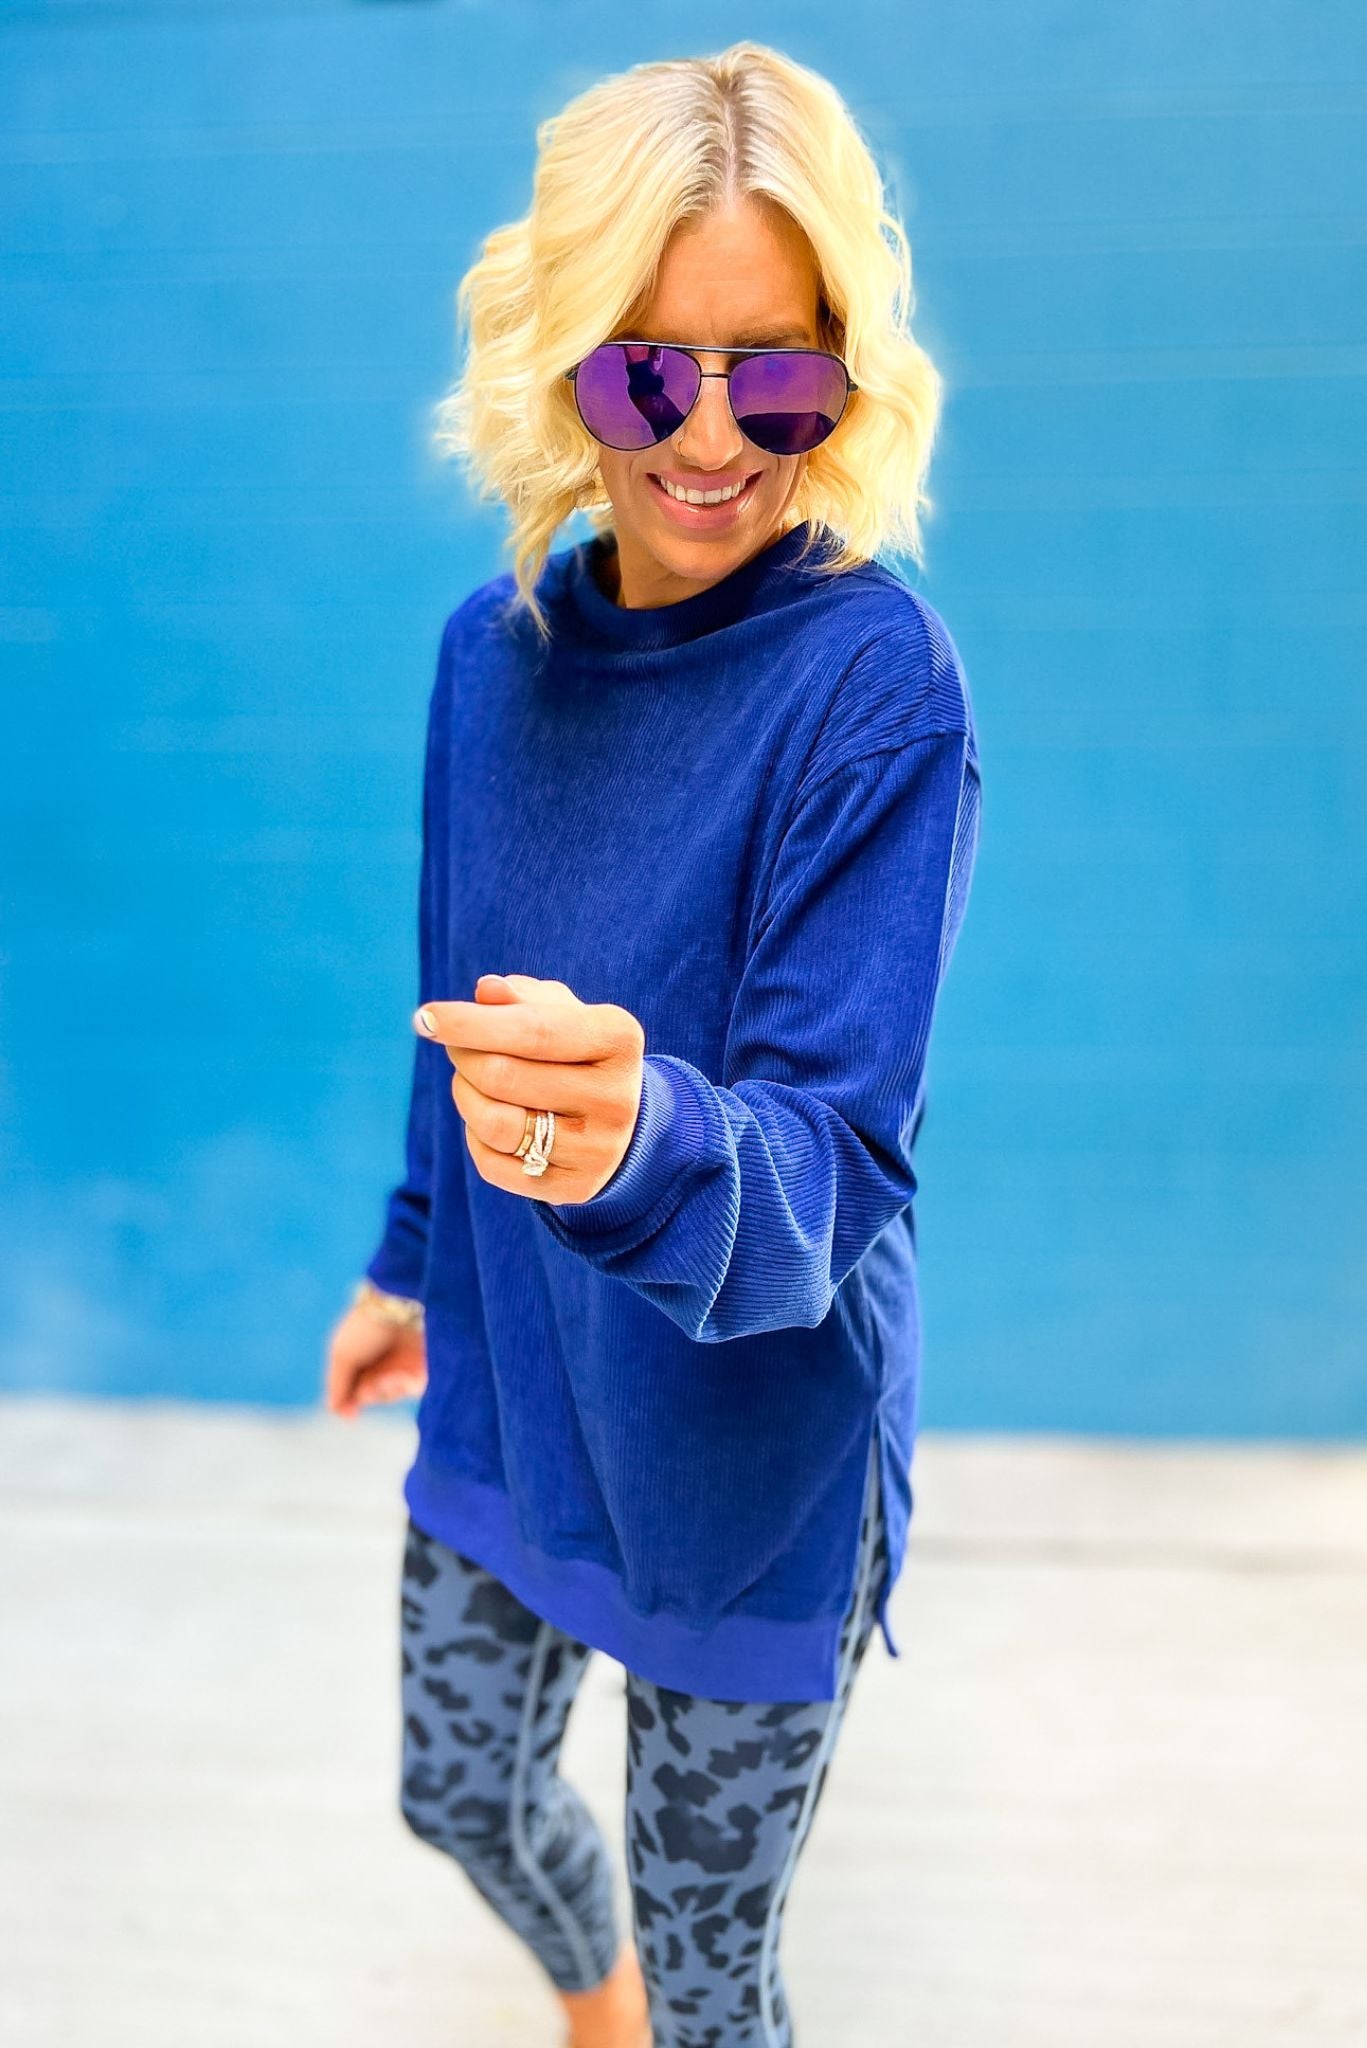 Royal Blue Corded Sweatshirt With Side Slit SSYS The Label